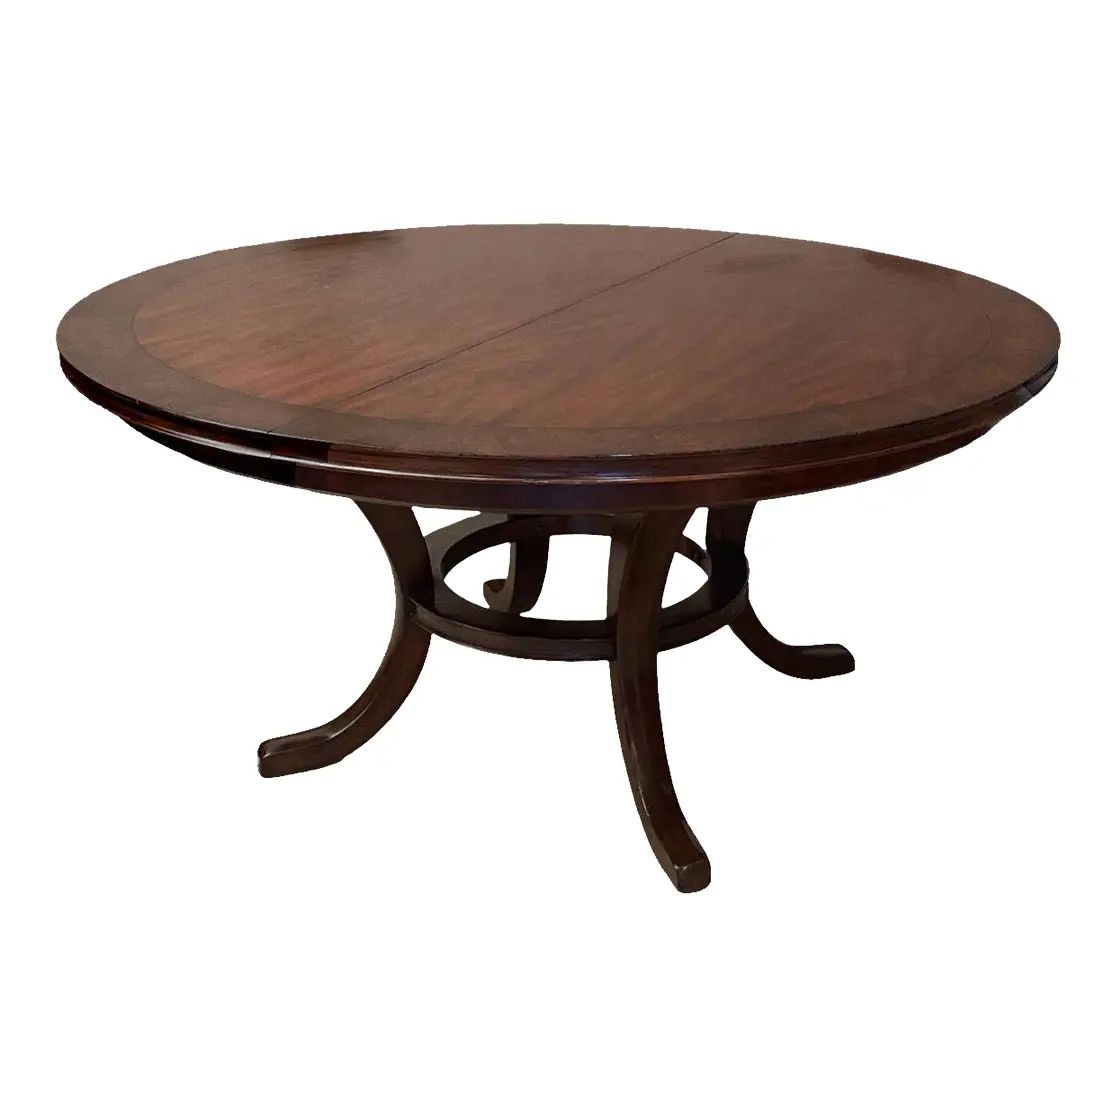 Round-To-Oval Cherry Crown & Burlwood Pedestal Dining Table With Extension Leaf | Chairish